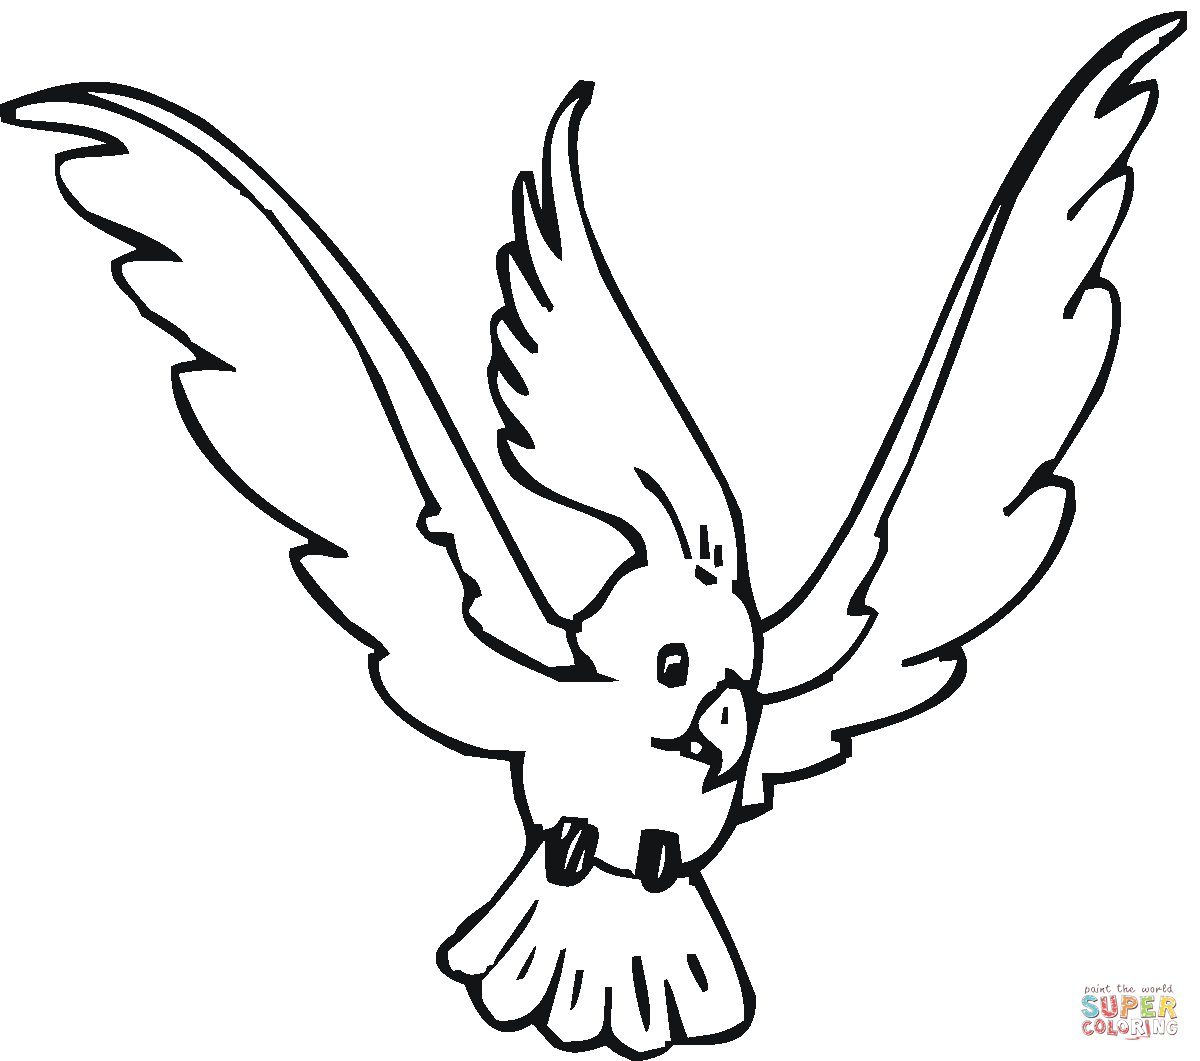 Sulphur-crested Cockatoo coloring #4, Download drawings